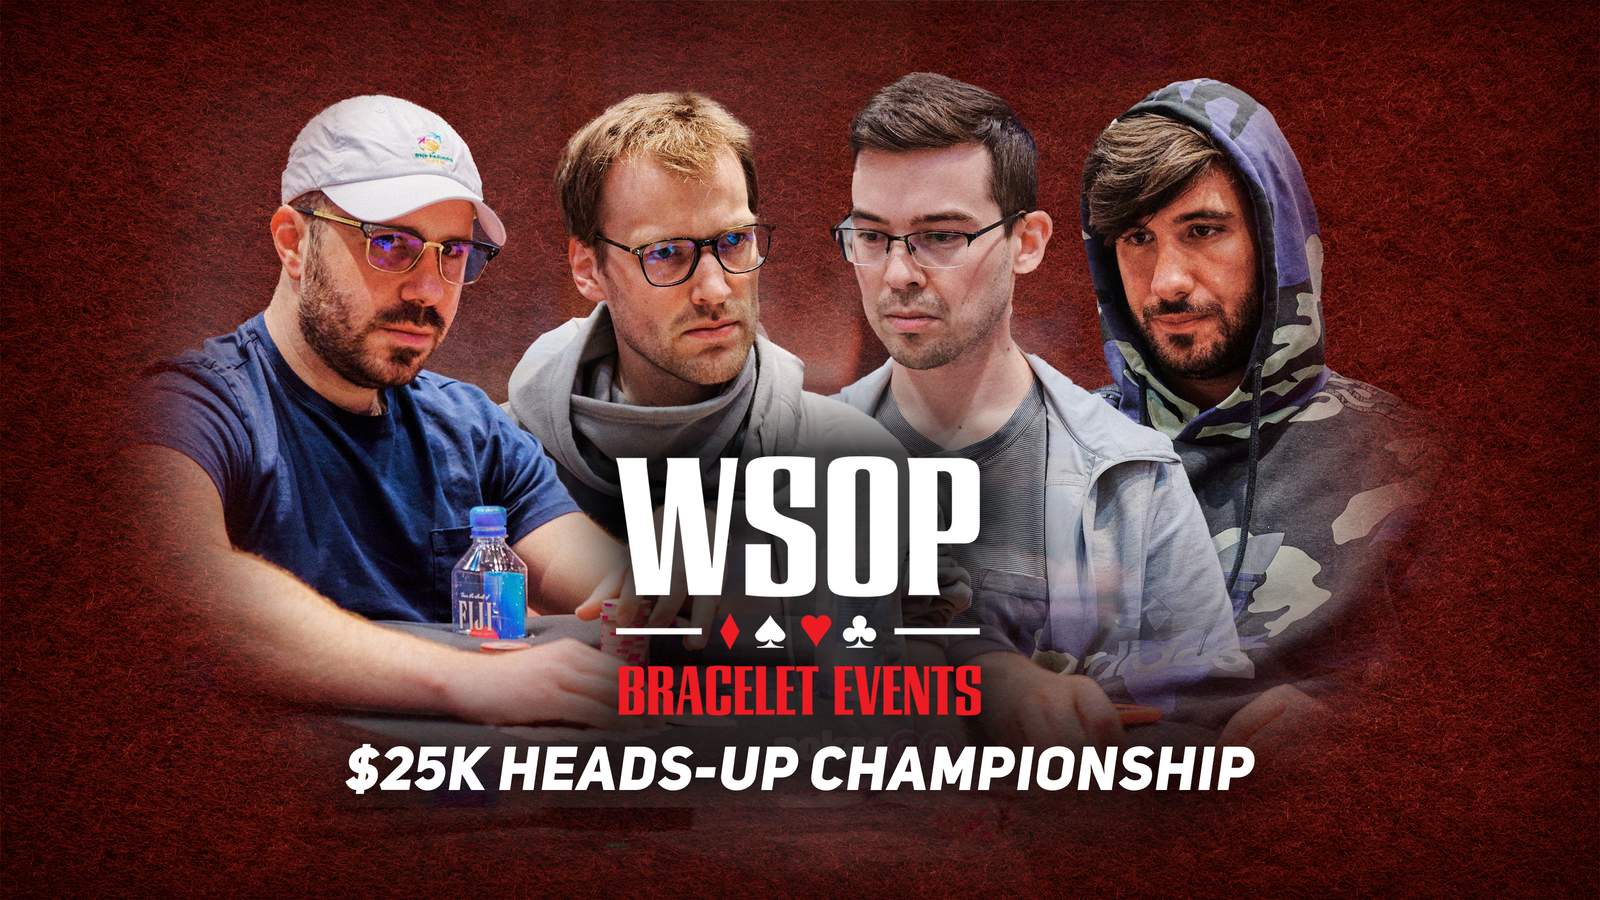 Watch the WSOP Event #6: $25k Heads-Up Championship on PokerGO.com at 8 p.m. ET